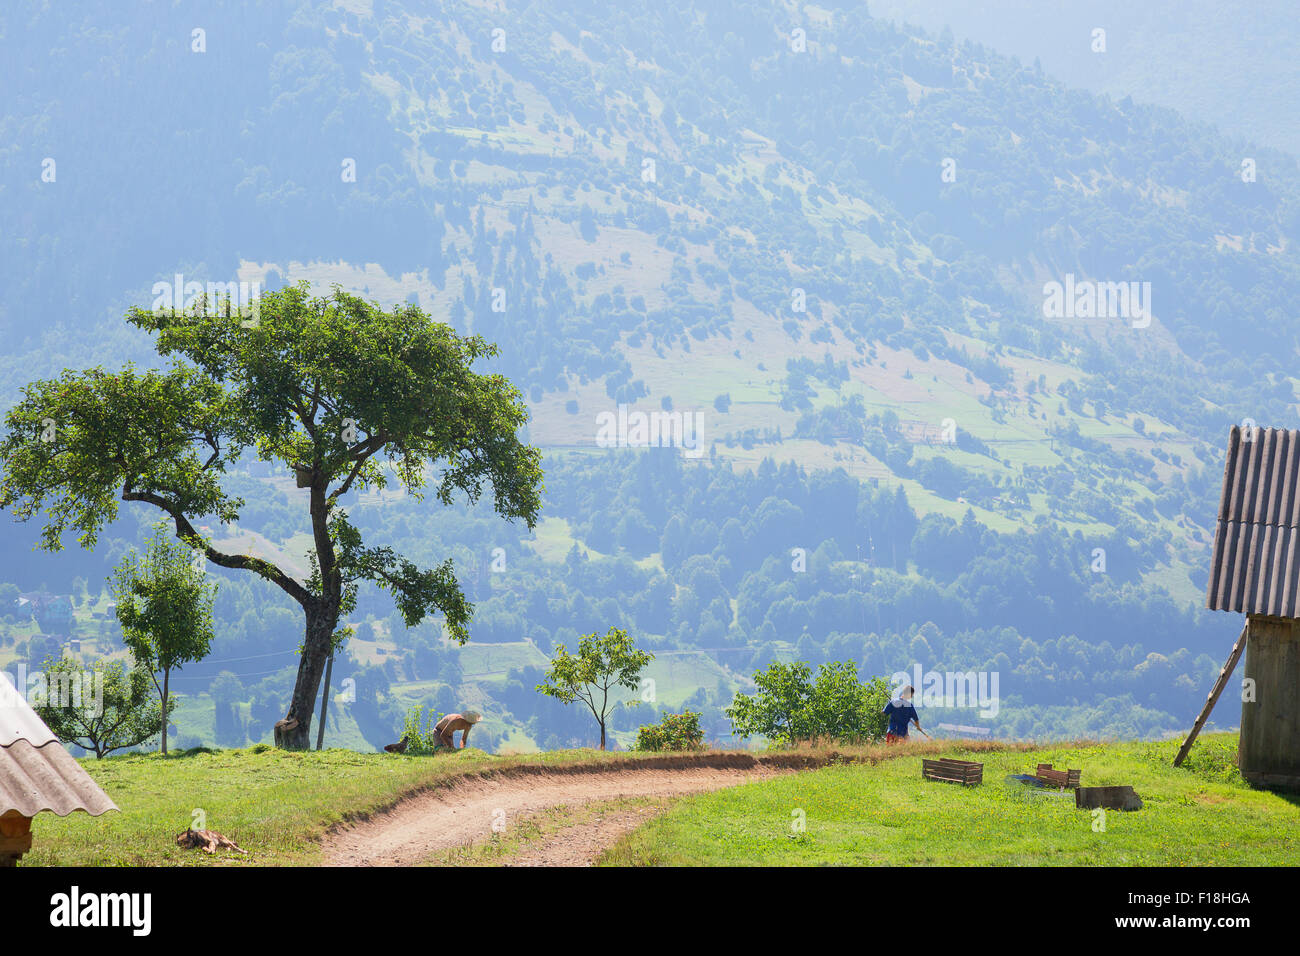 tree near road in mountains. Stock Photo